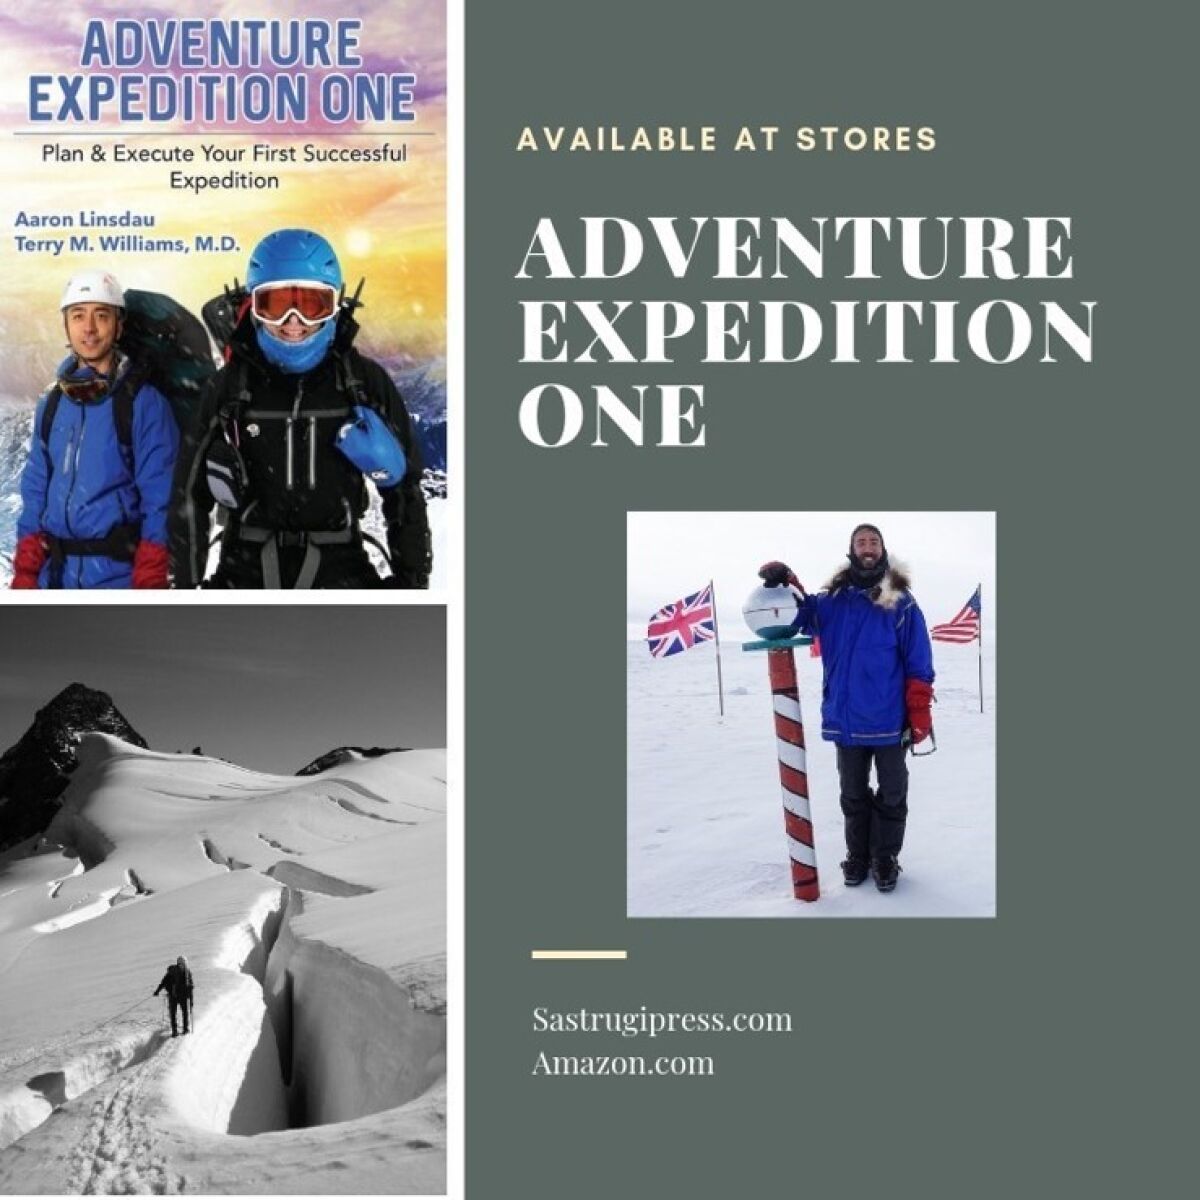 The “Preparing for Your Expedition” talk will be held at the Encinitas REI store in Leucadia on Friday, July 19 at 6:30 p.m.